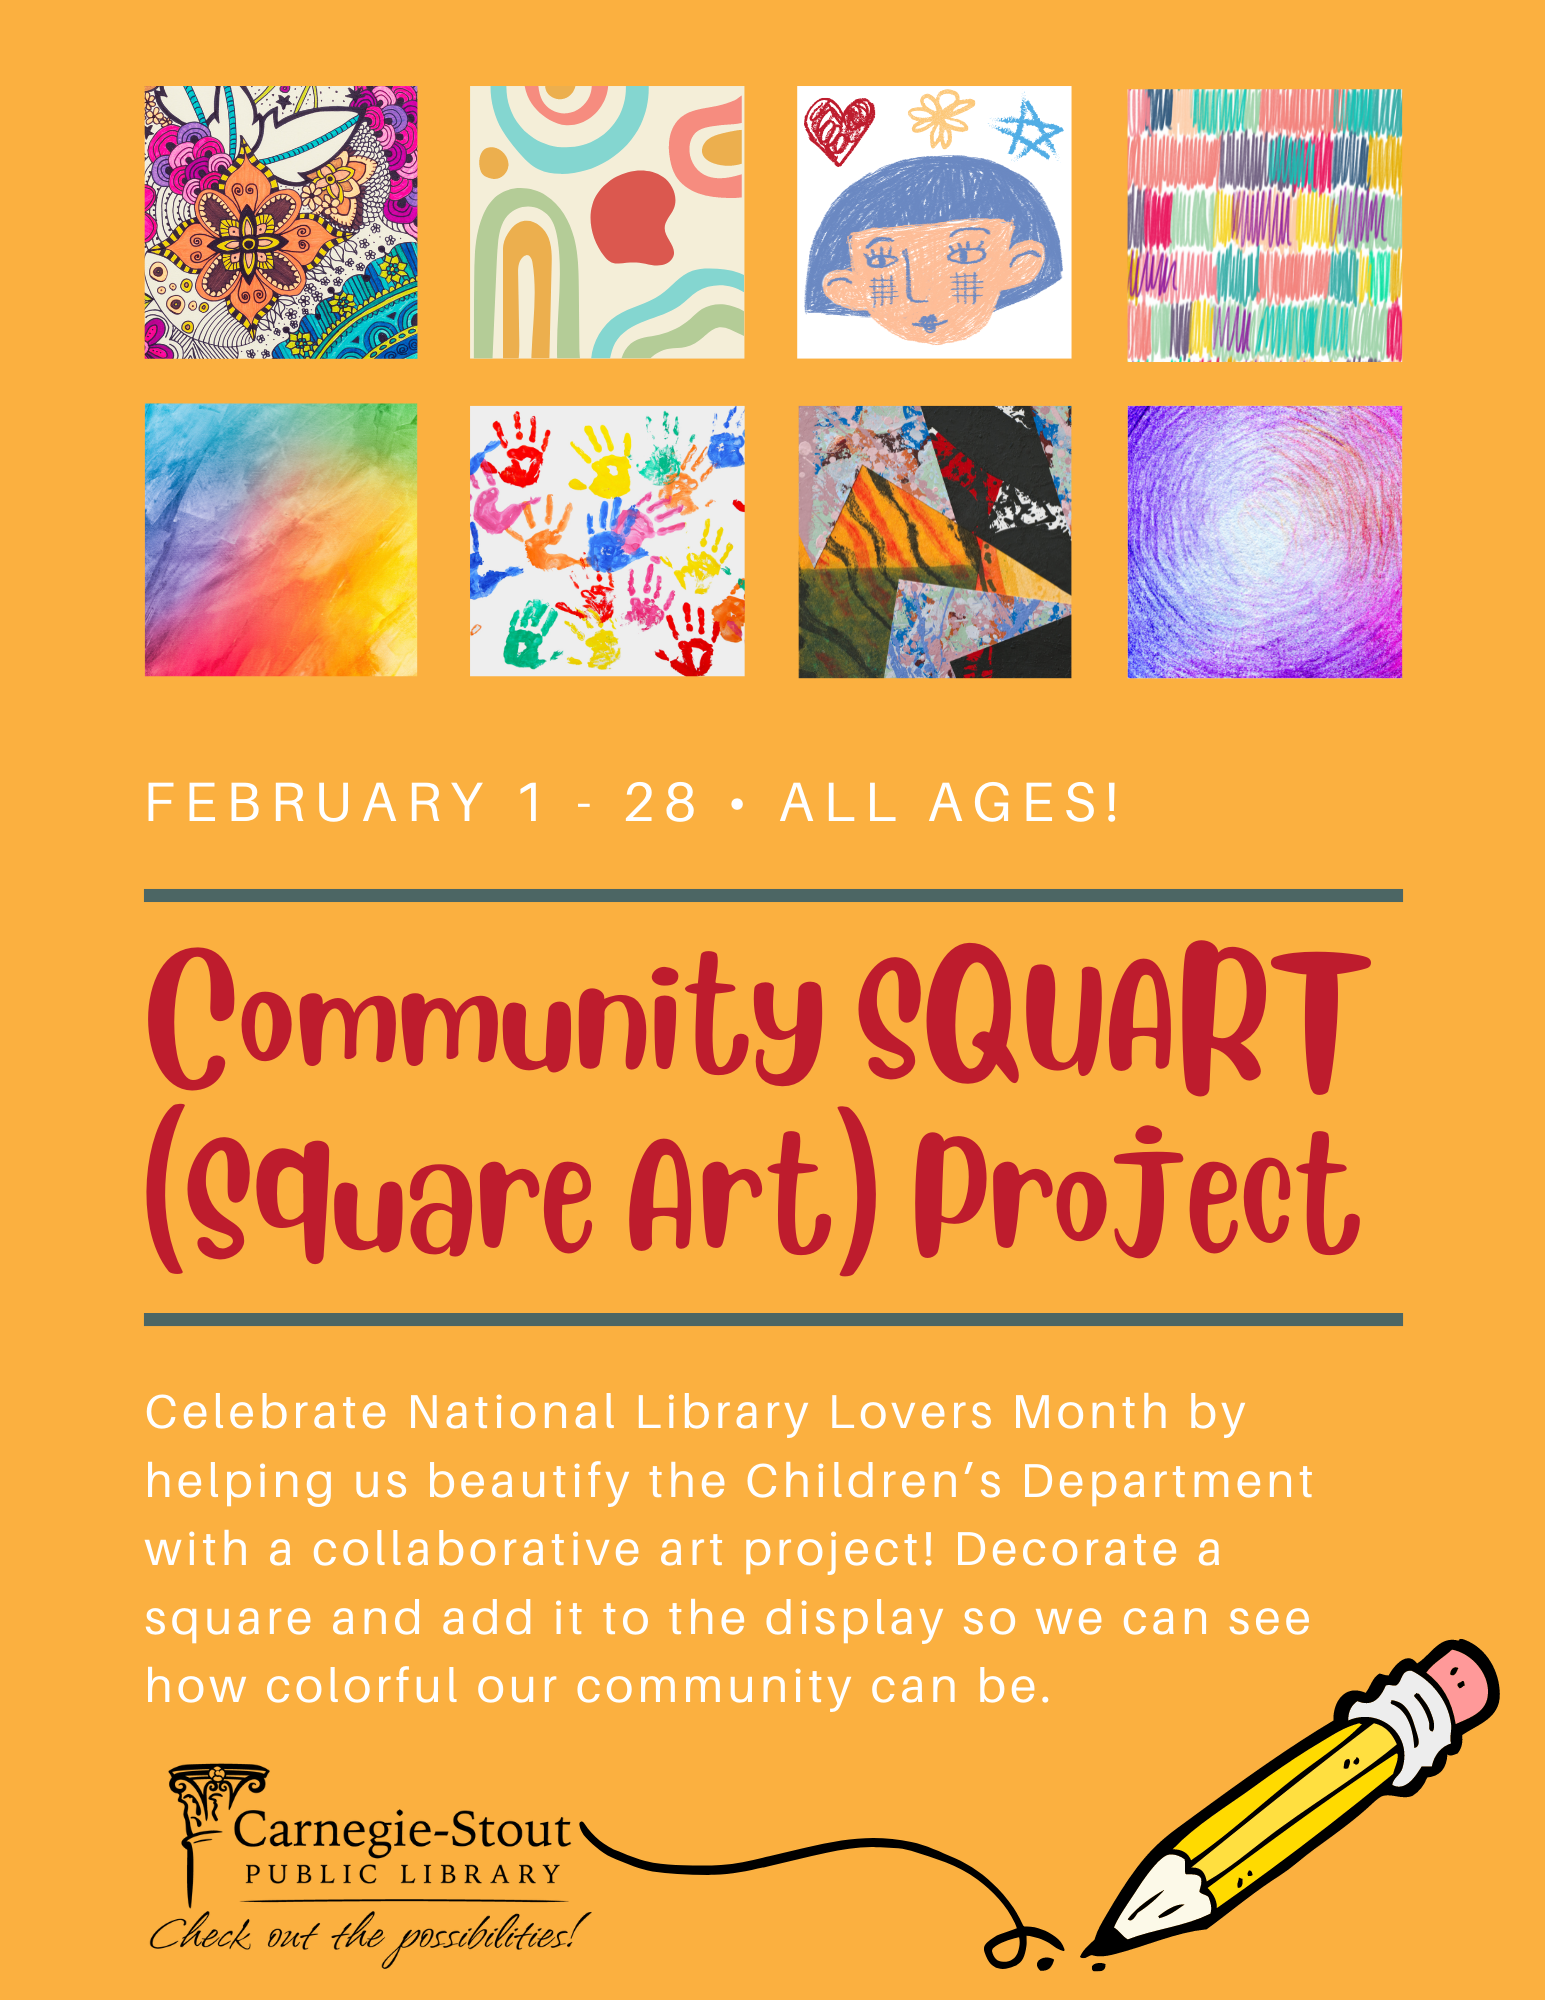 Flyer for the program featuring samples of colorfully decorated squares.